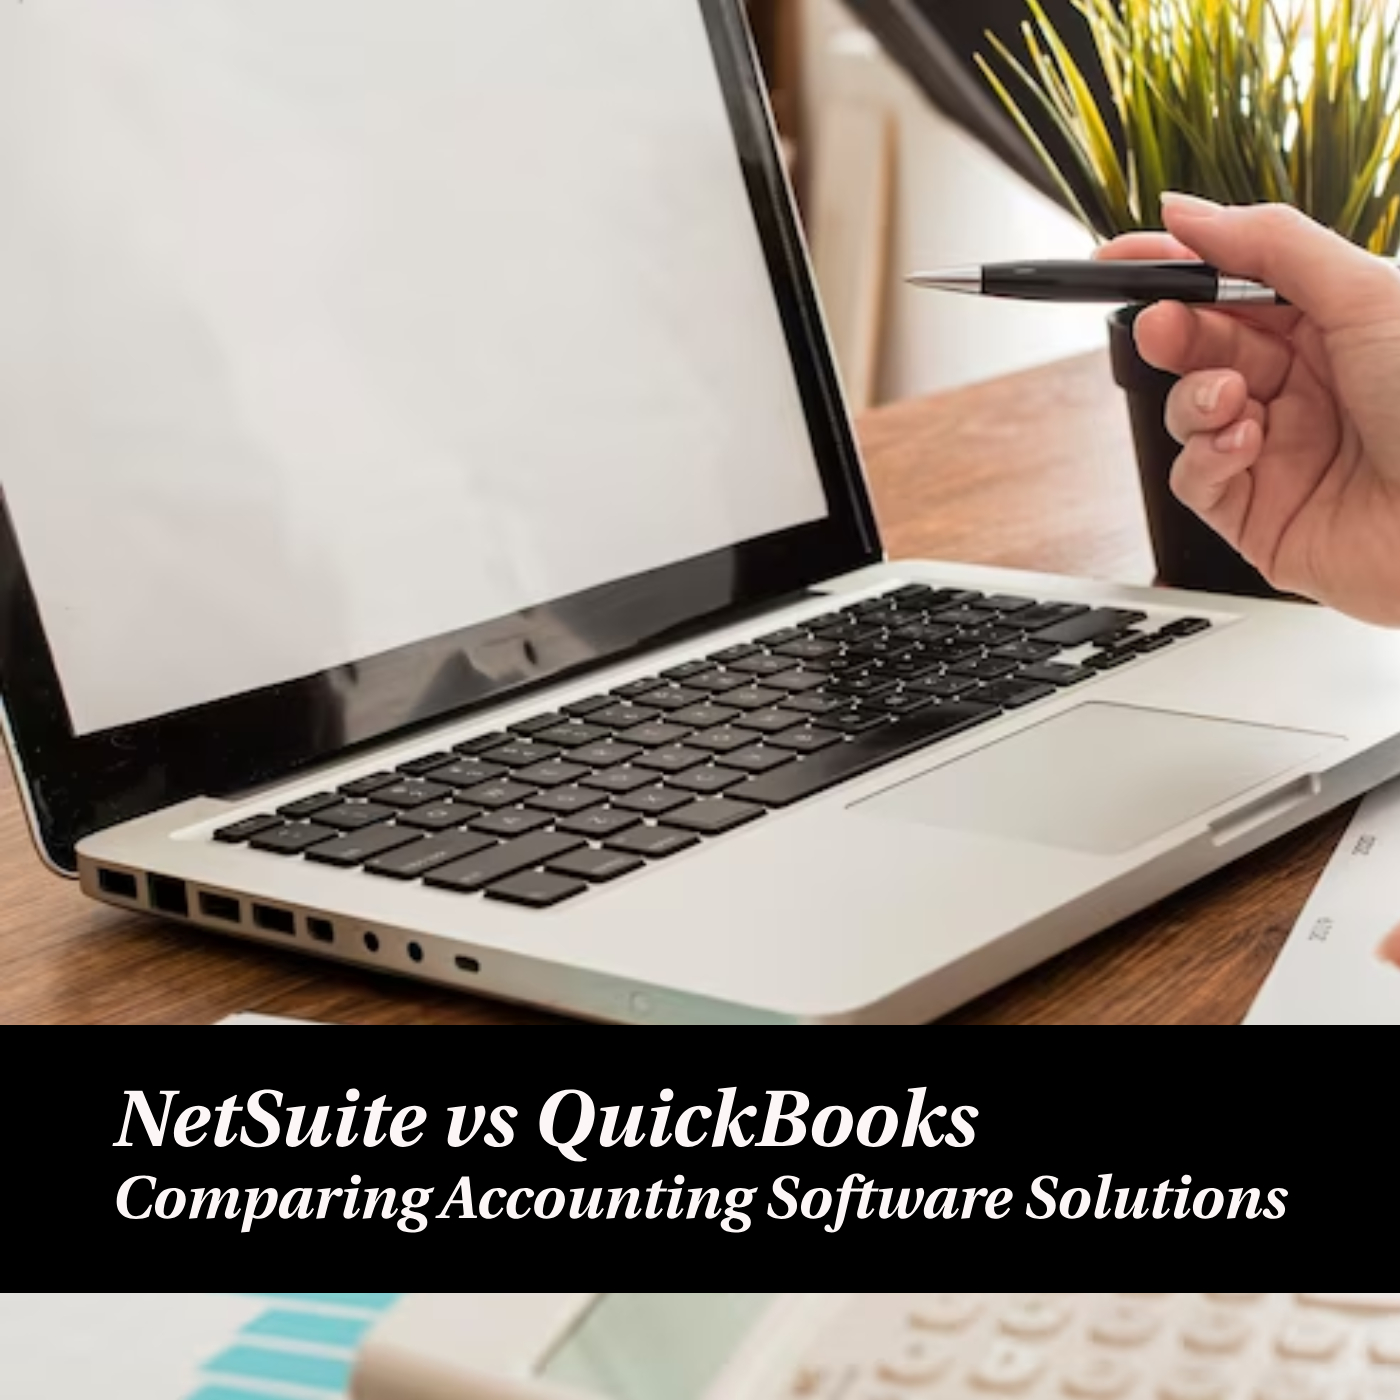 Choosing Between NetSuite vs QuickBooks: A Guide for Small Business Owners